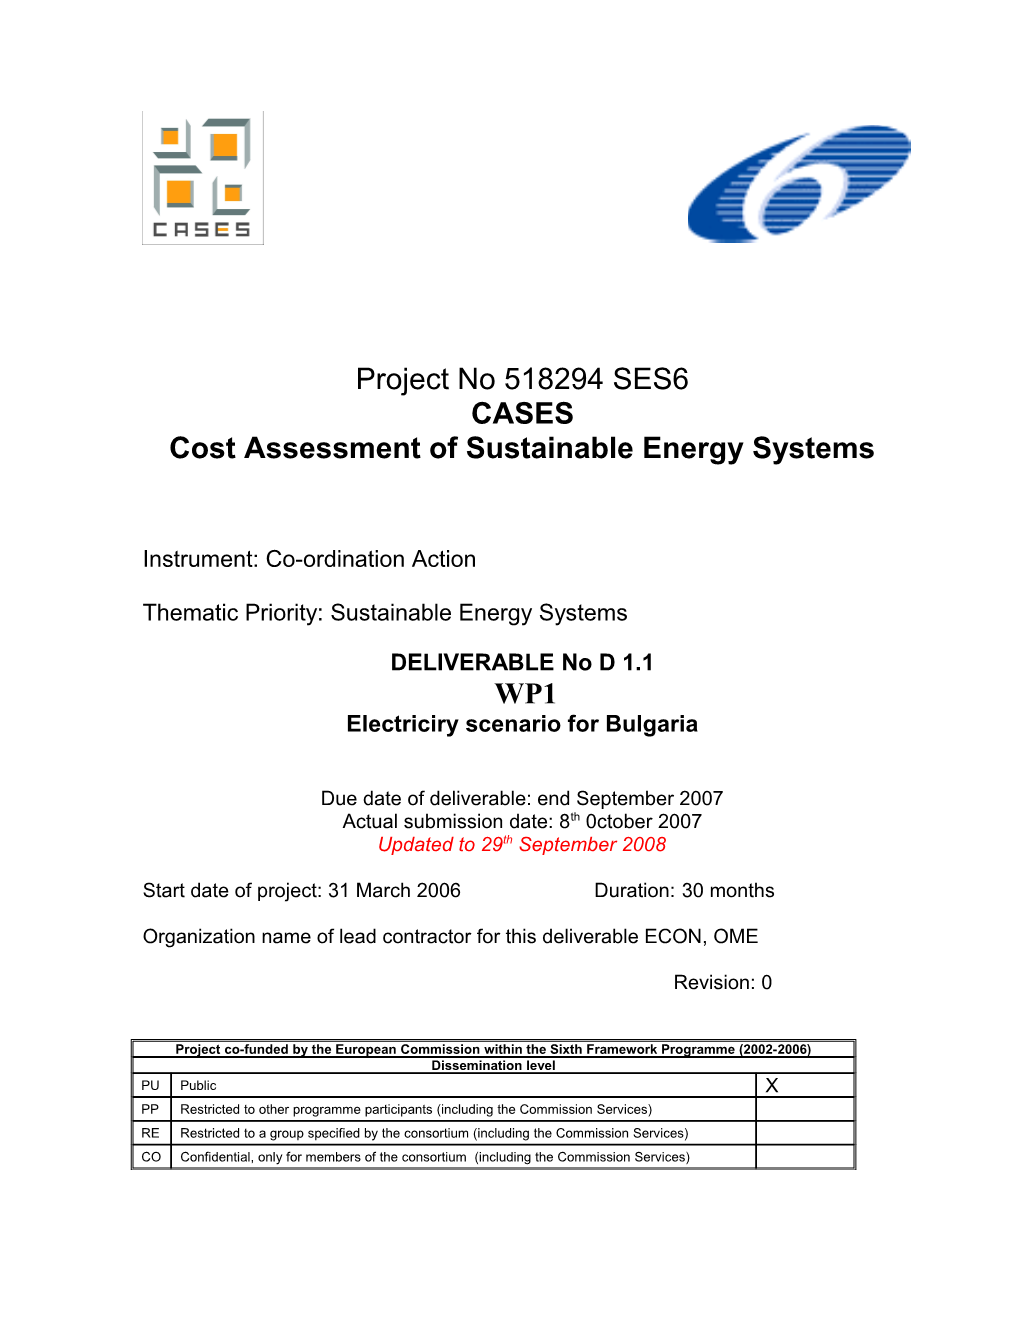 Cost Assessment of Sustainable Energy Systems